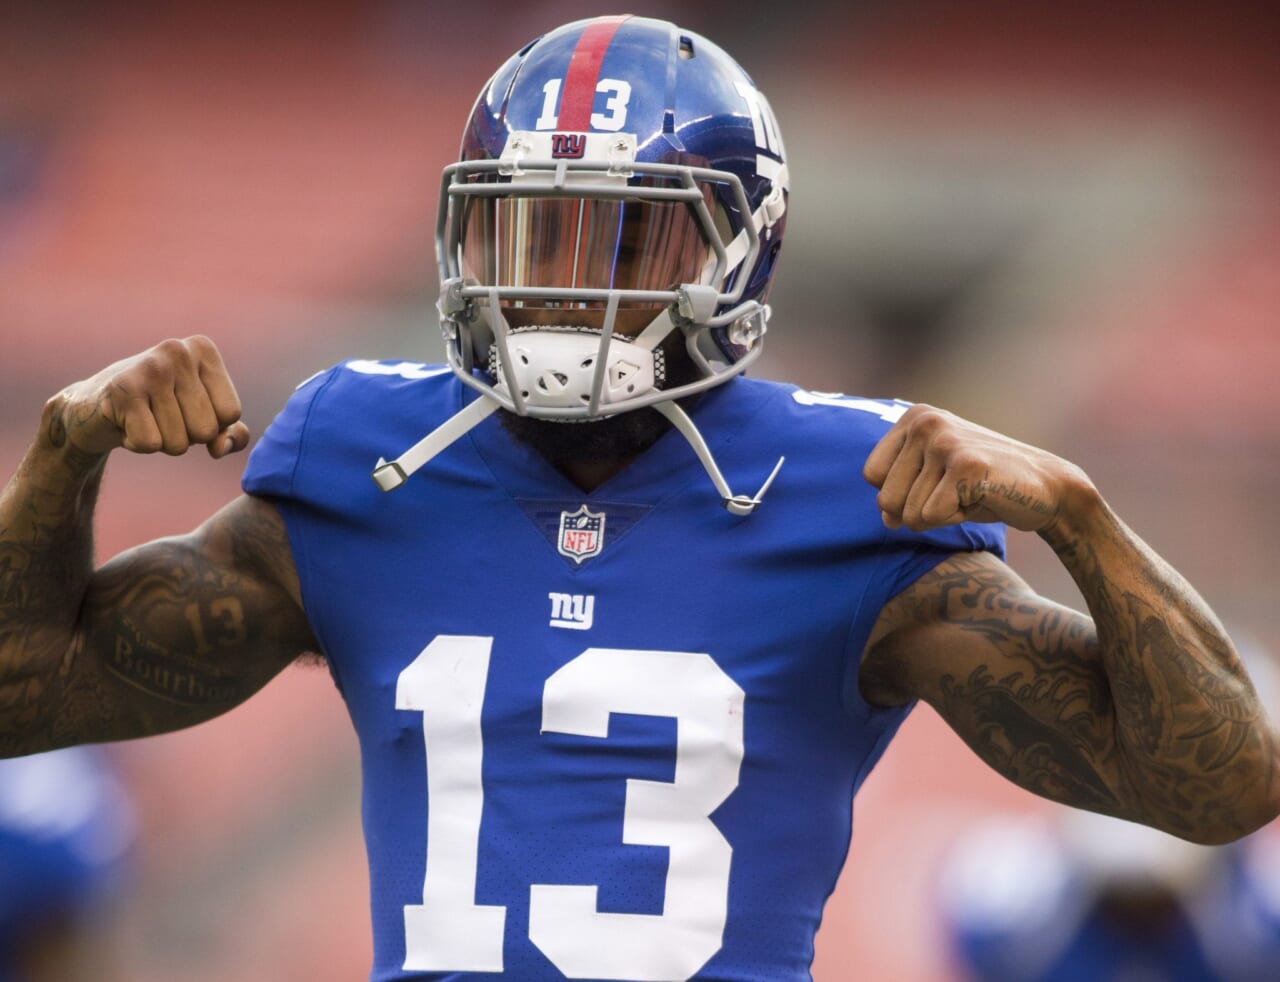 New York Giants: Colin Cowherd Gets the Last Laugh in OBJ Twitter Rant